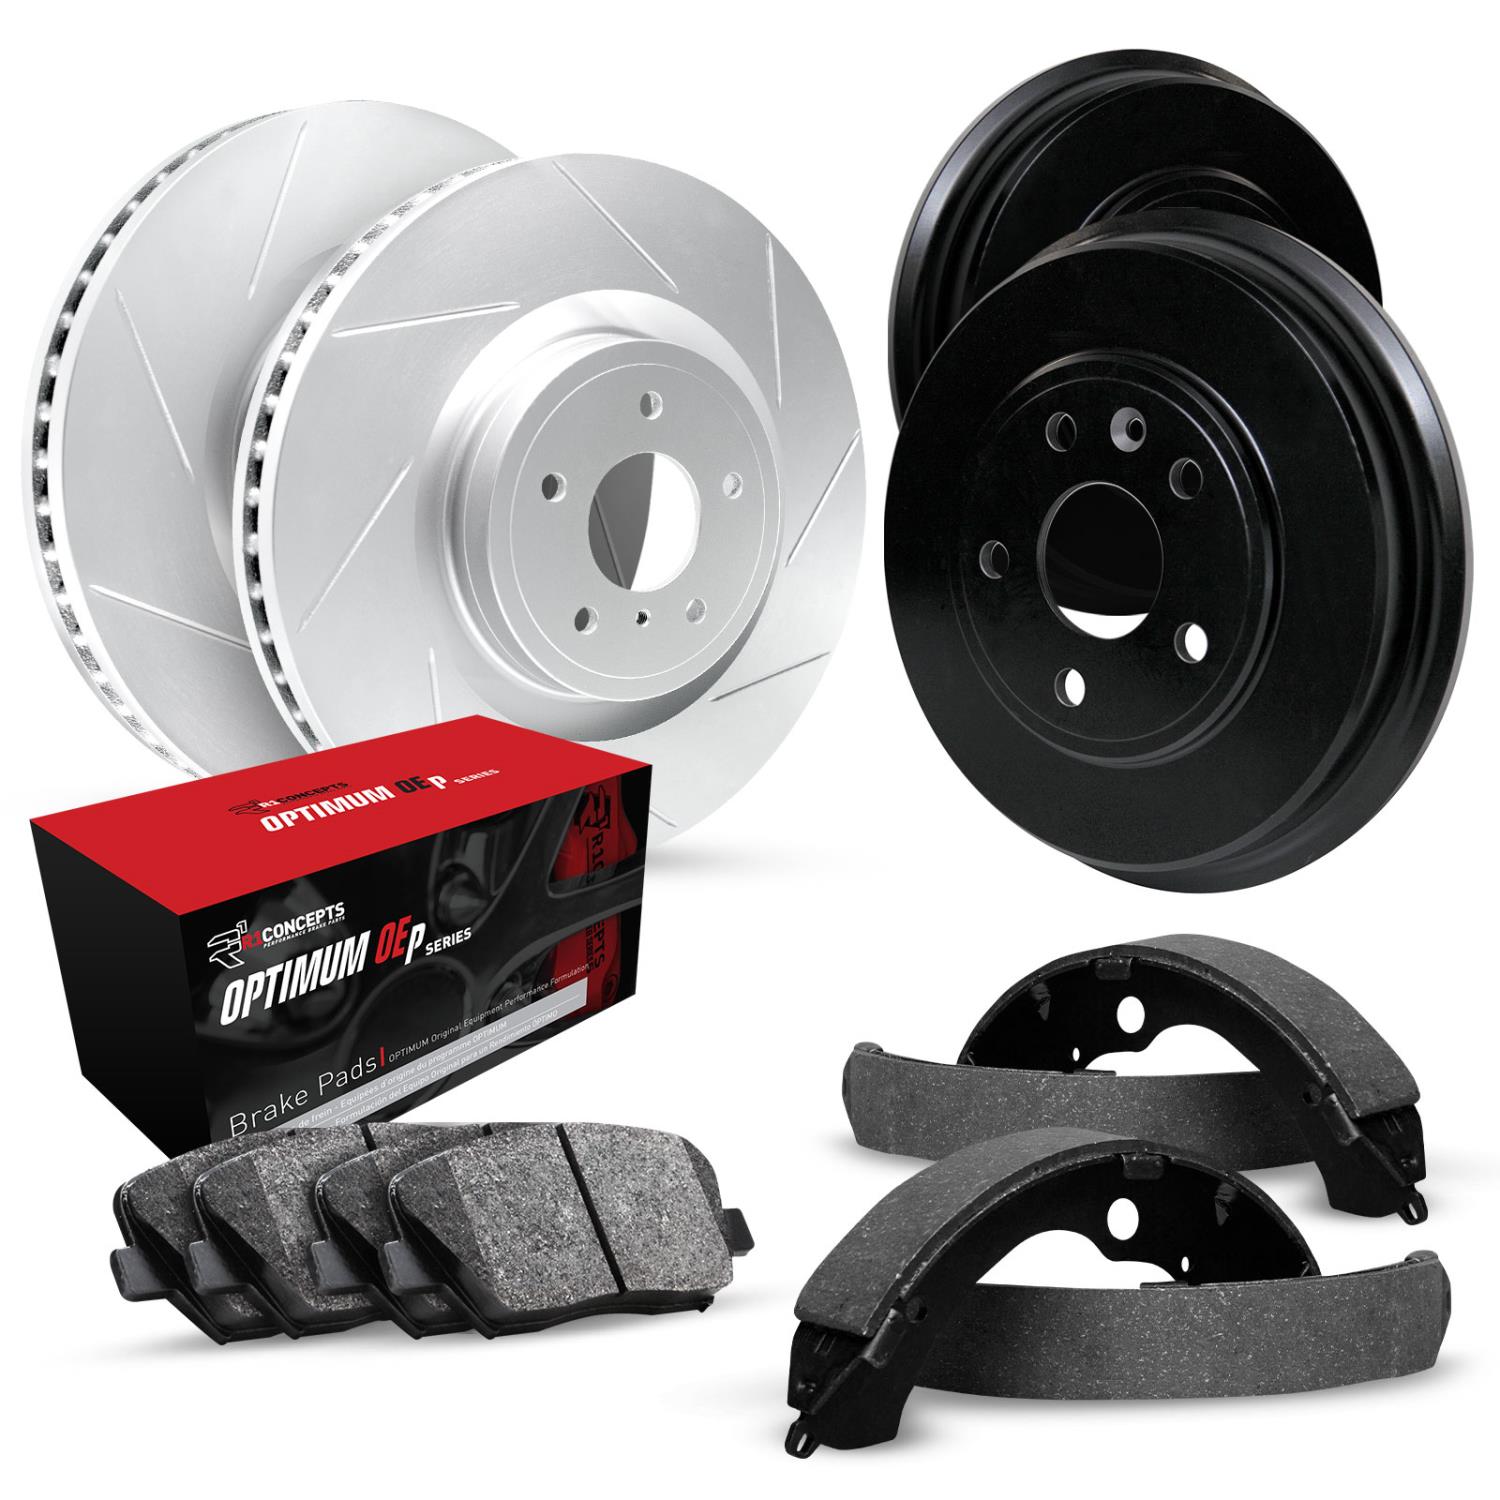 GEO-Carbon Slotted Brake Rotor & Drum Set w/Optimum OE Pads & Shoes, 1998-2000 GM, Position: Front & Rear